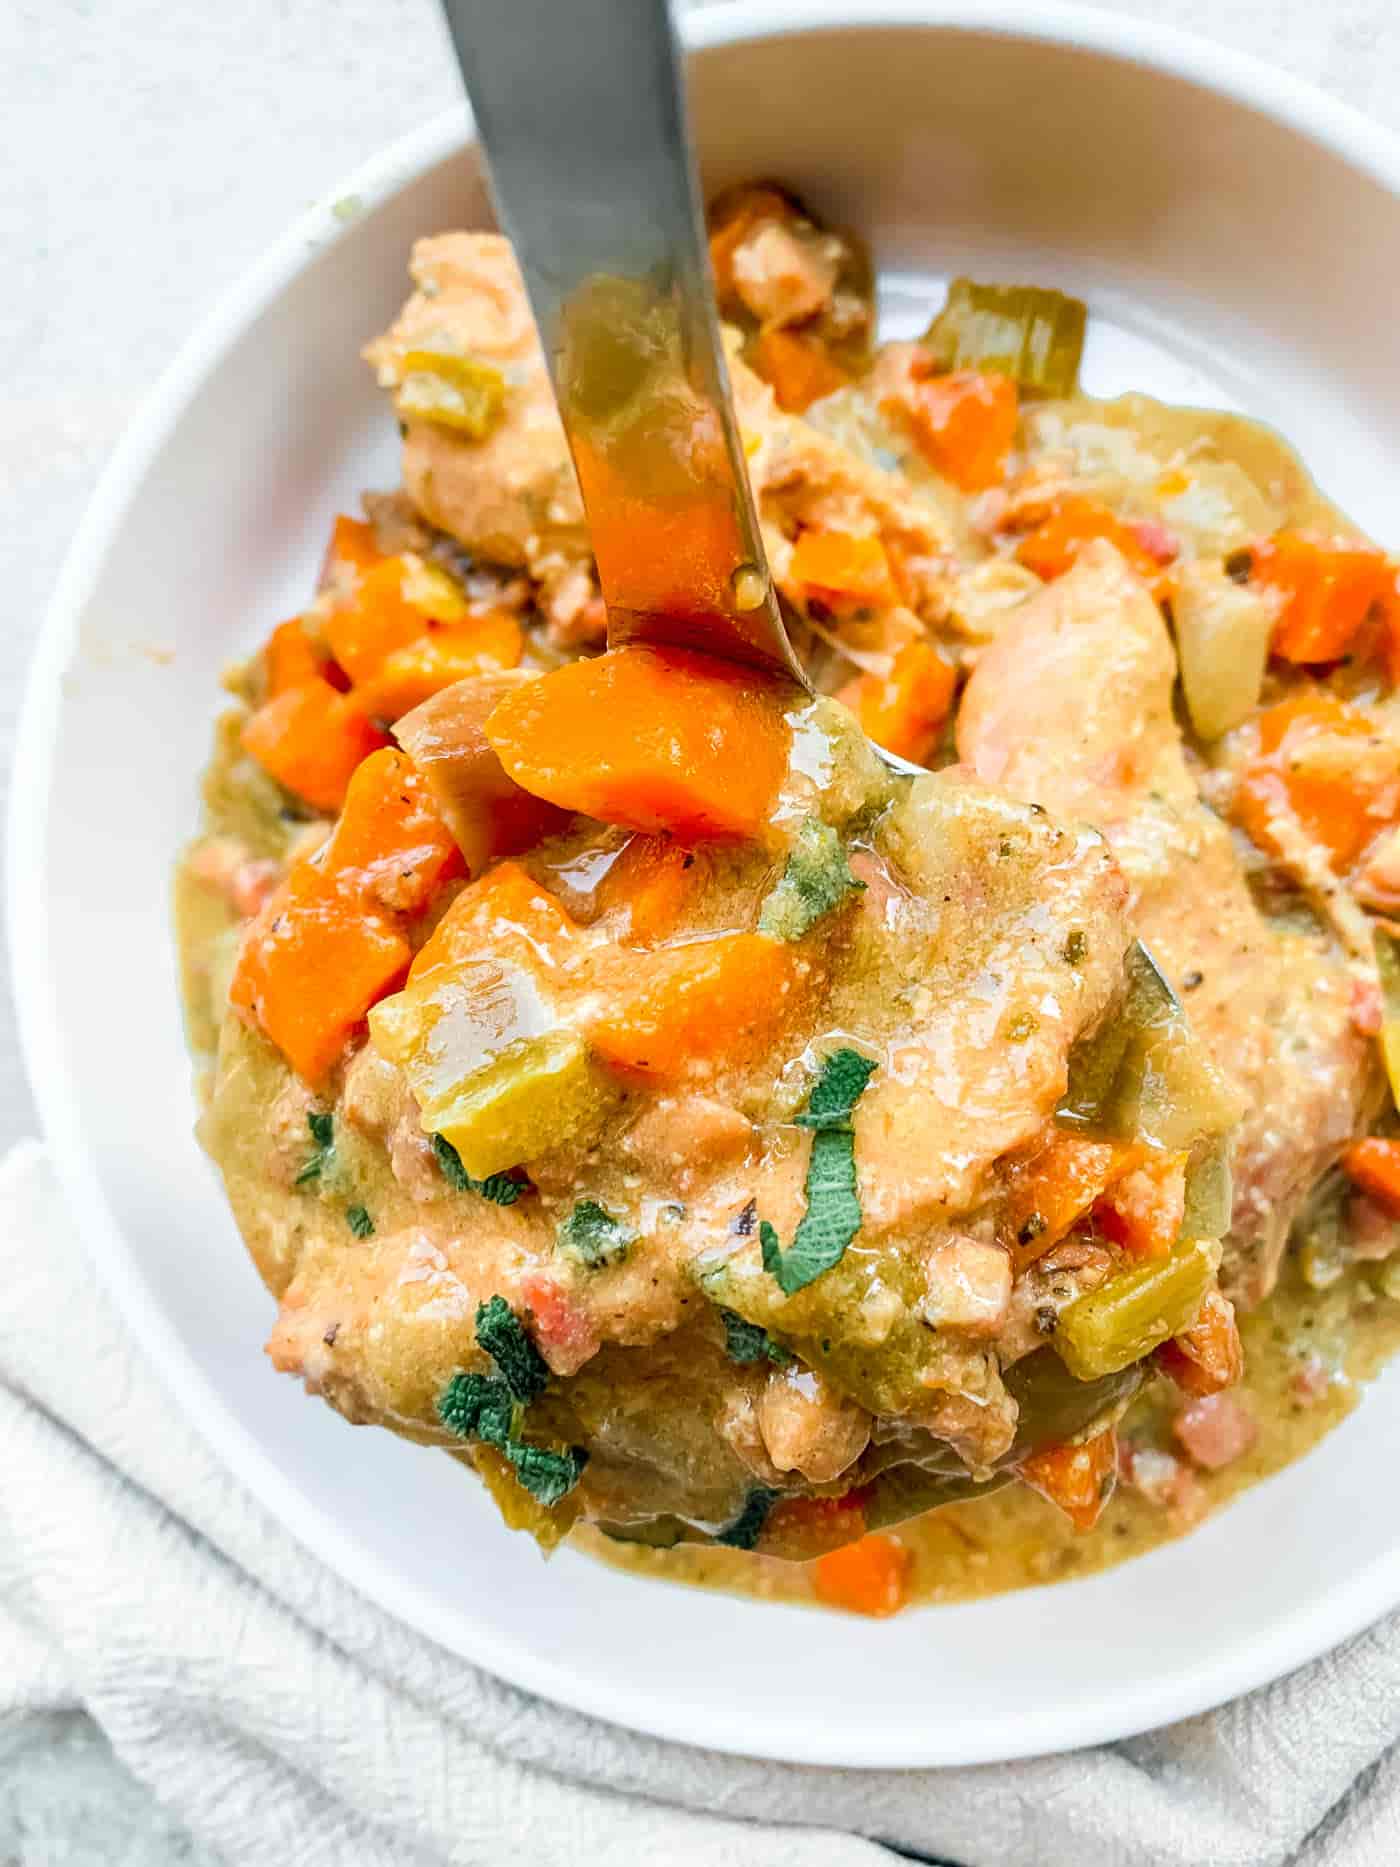 turkey casserole with celery, onion and carrot chunks on a ladle being held over a white dish full of the stew in the background